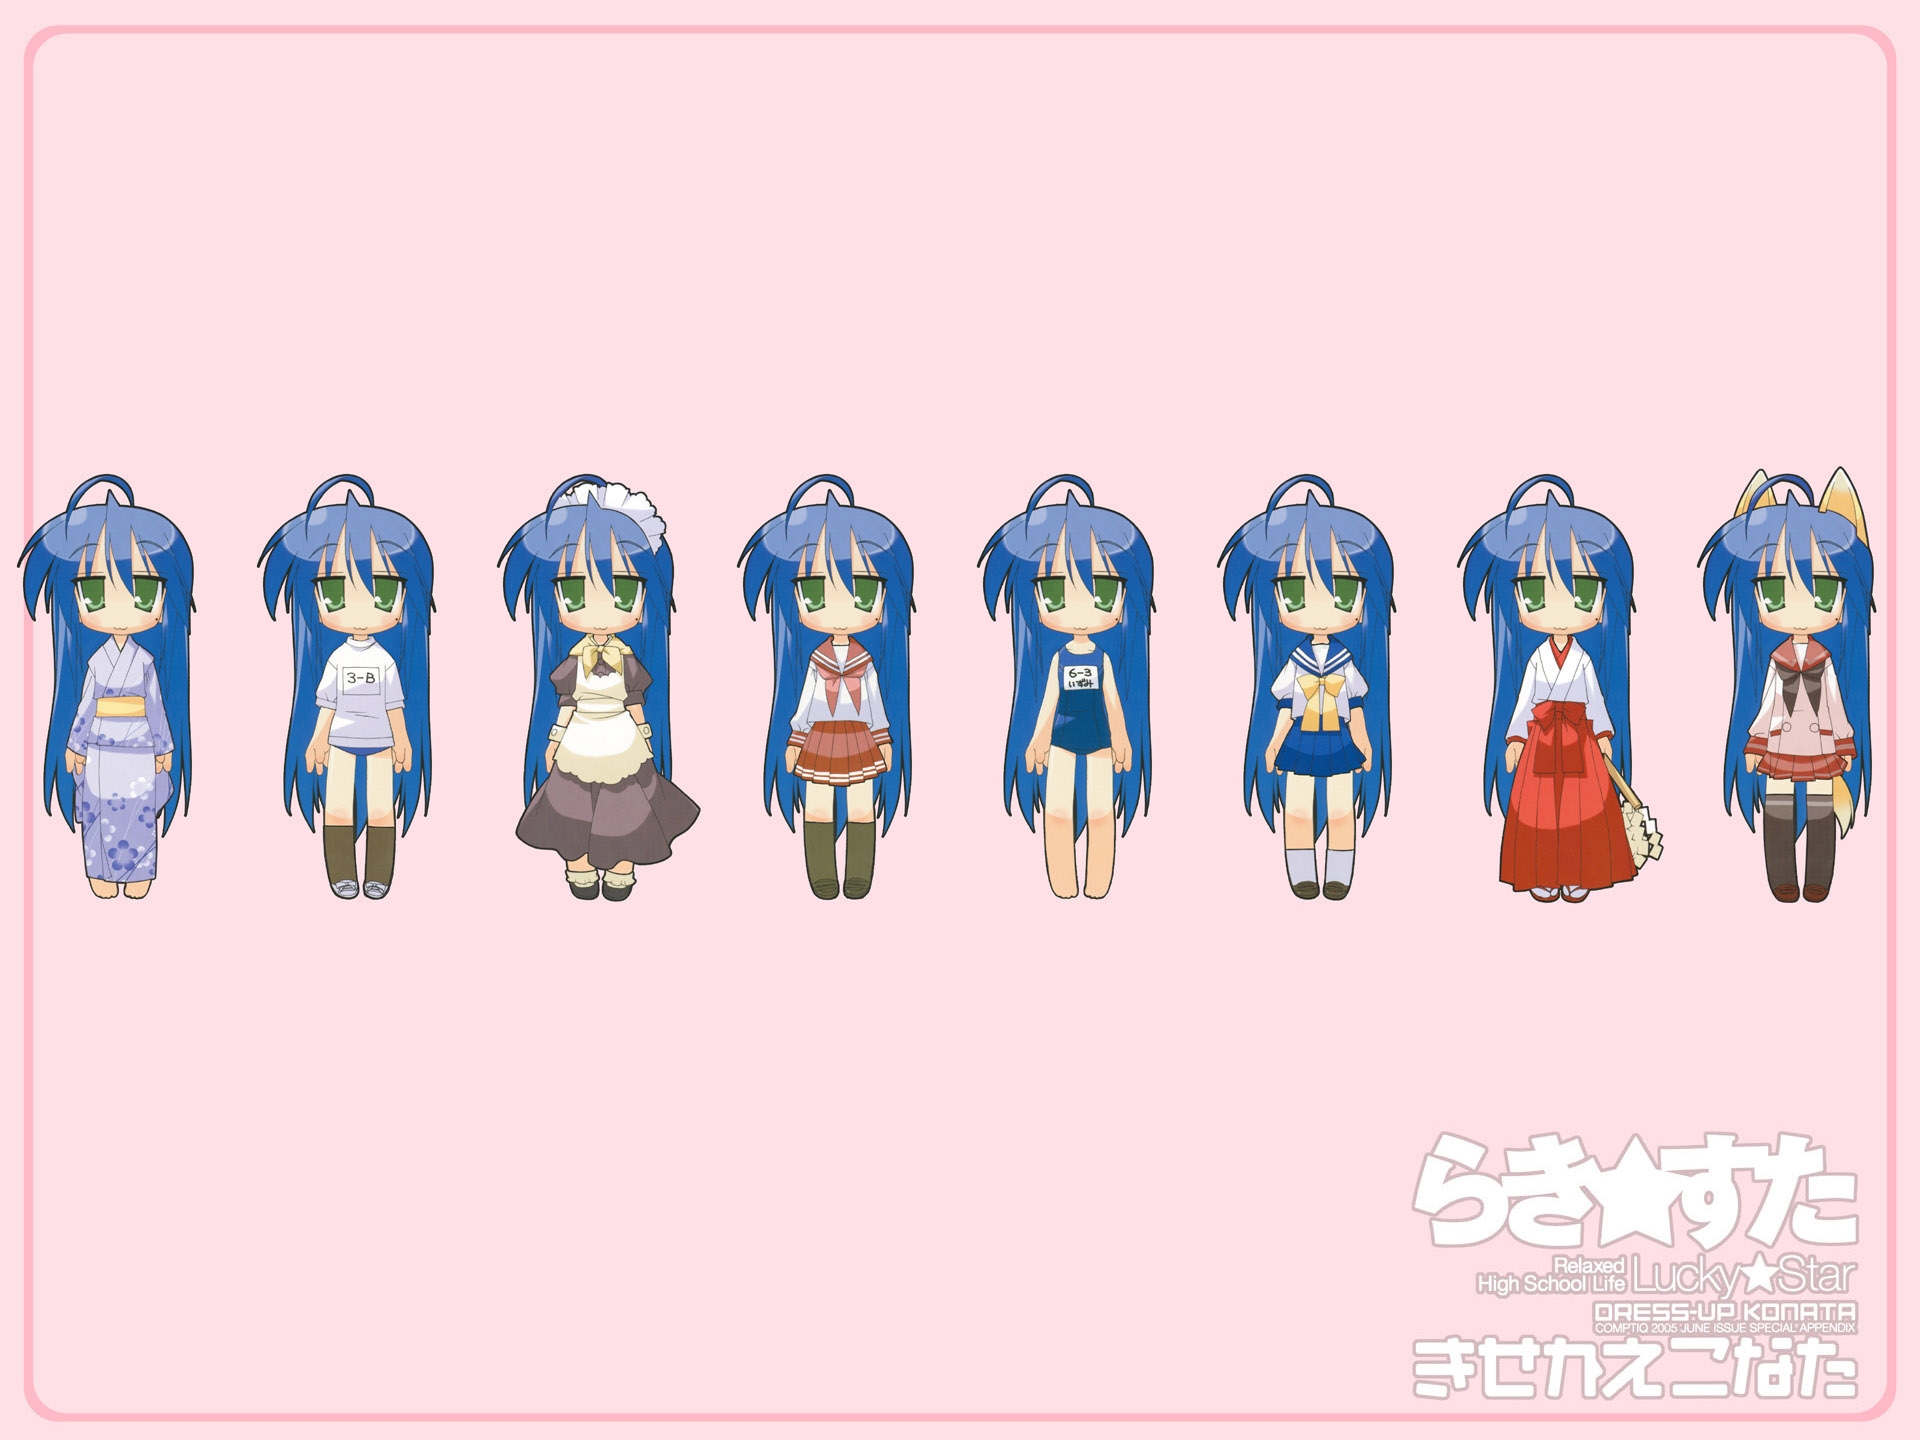 1. "Kagami Hiiragi" from Lucky Star - wide 9